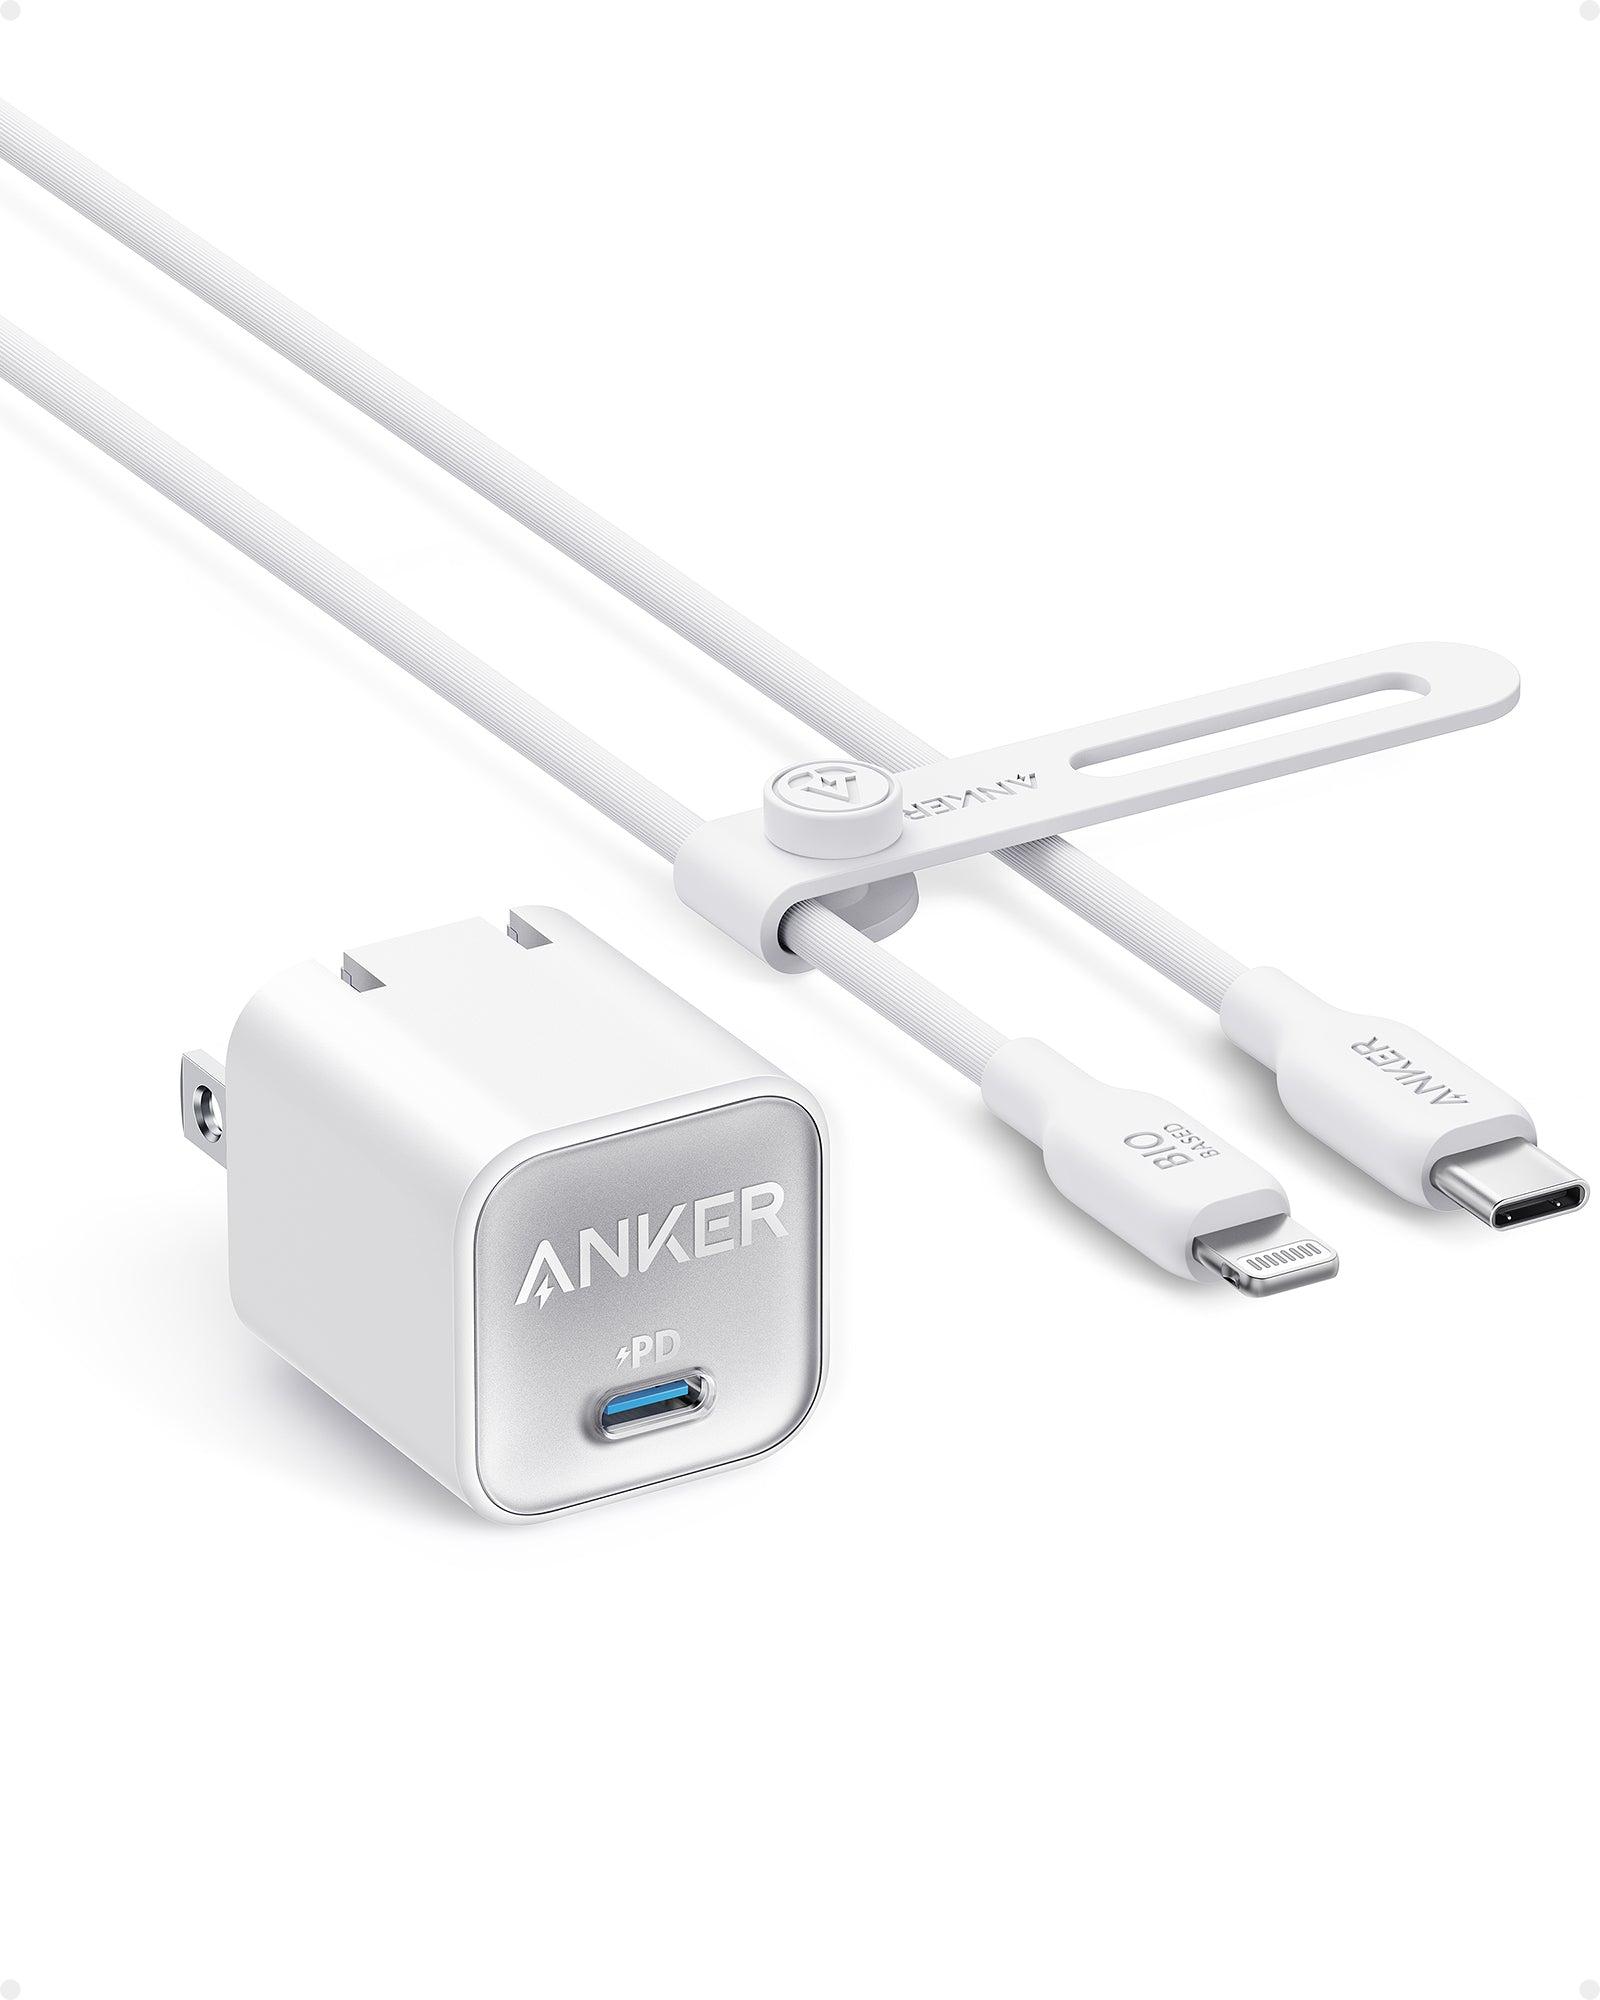 Anker <b>511</b> Charger (Nano 3, 30W) with USB-C to Lightning Cable (6ft)